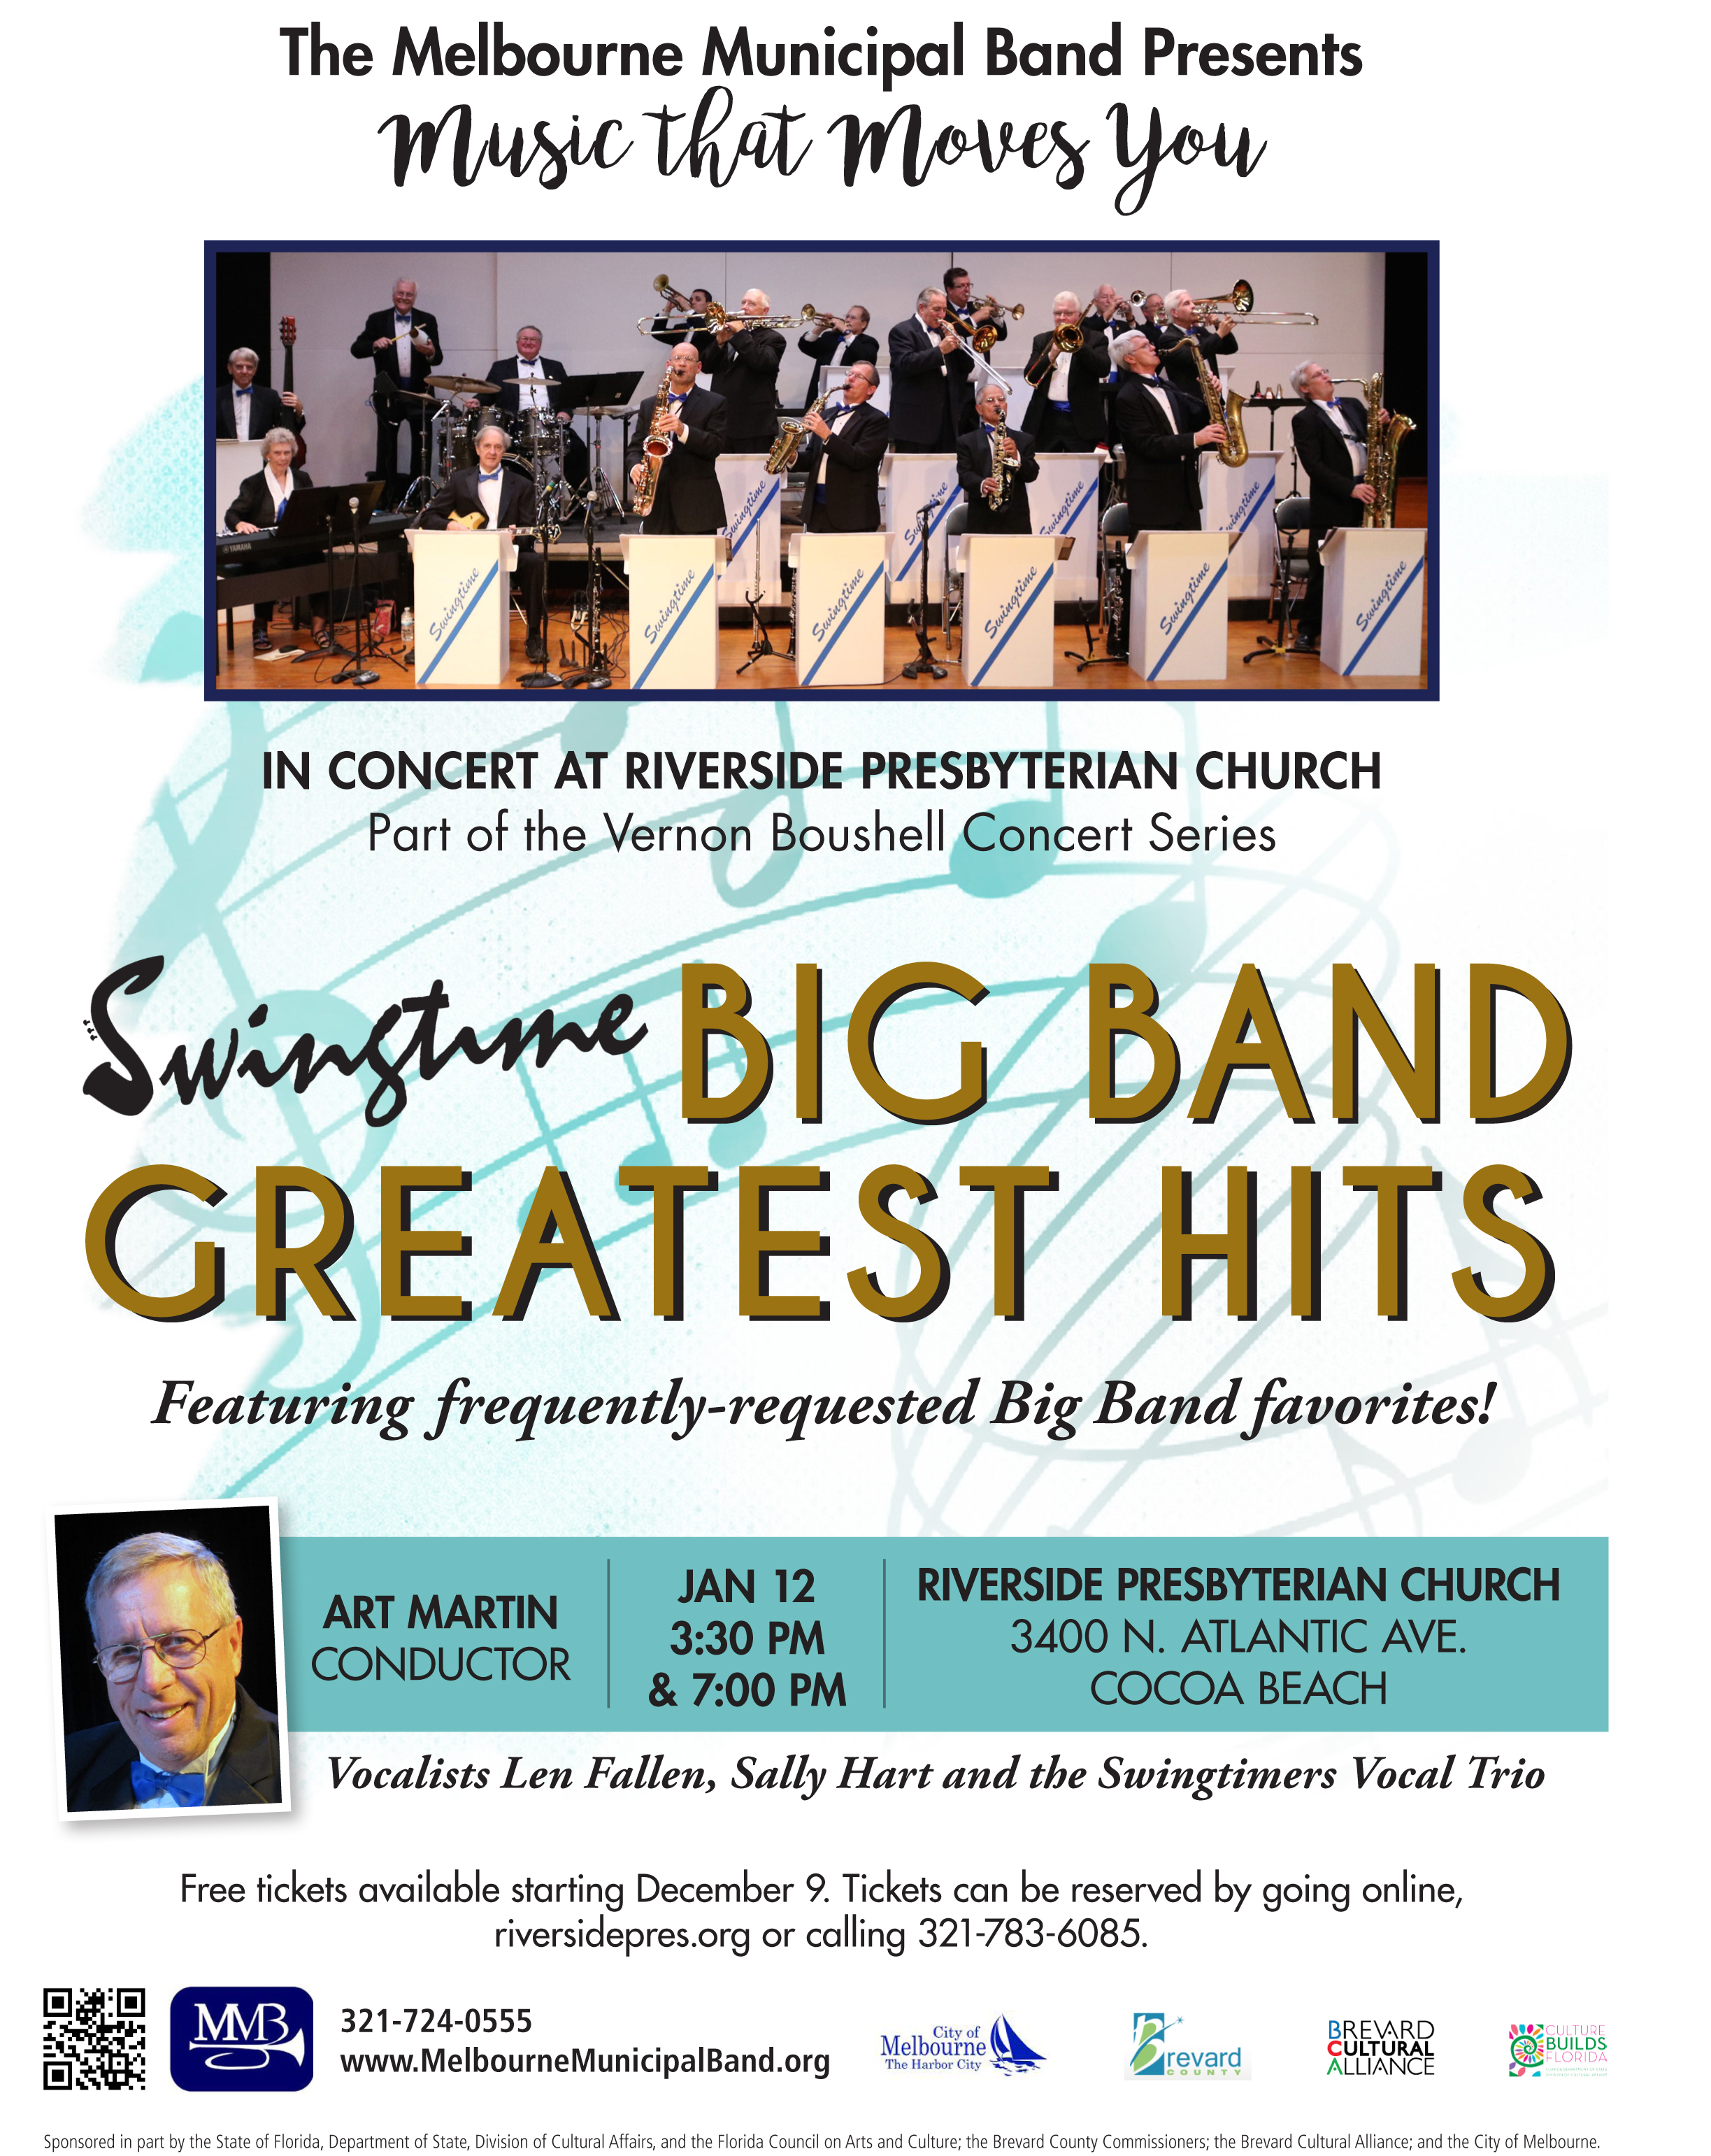 'Swingtime Big Band Greatest Hits' presented by The Melbourne Municipal Band